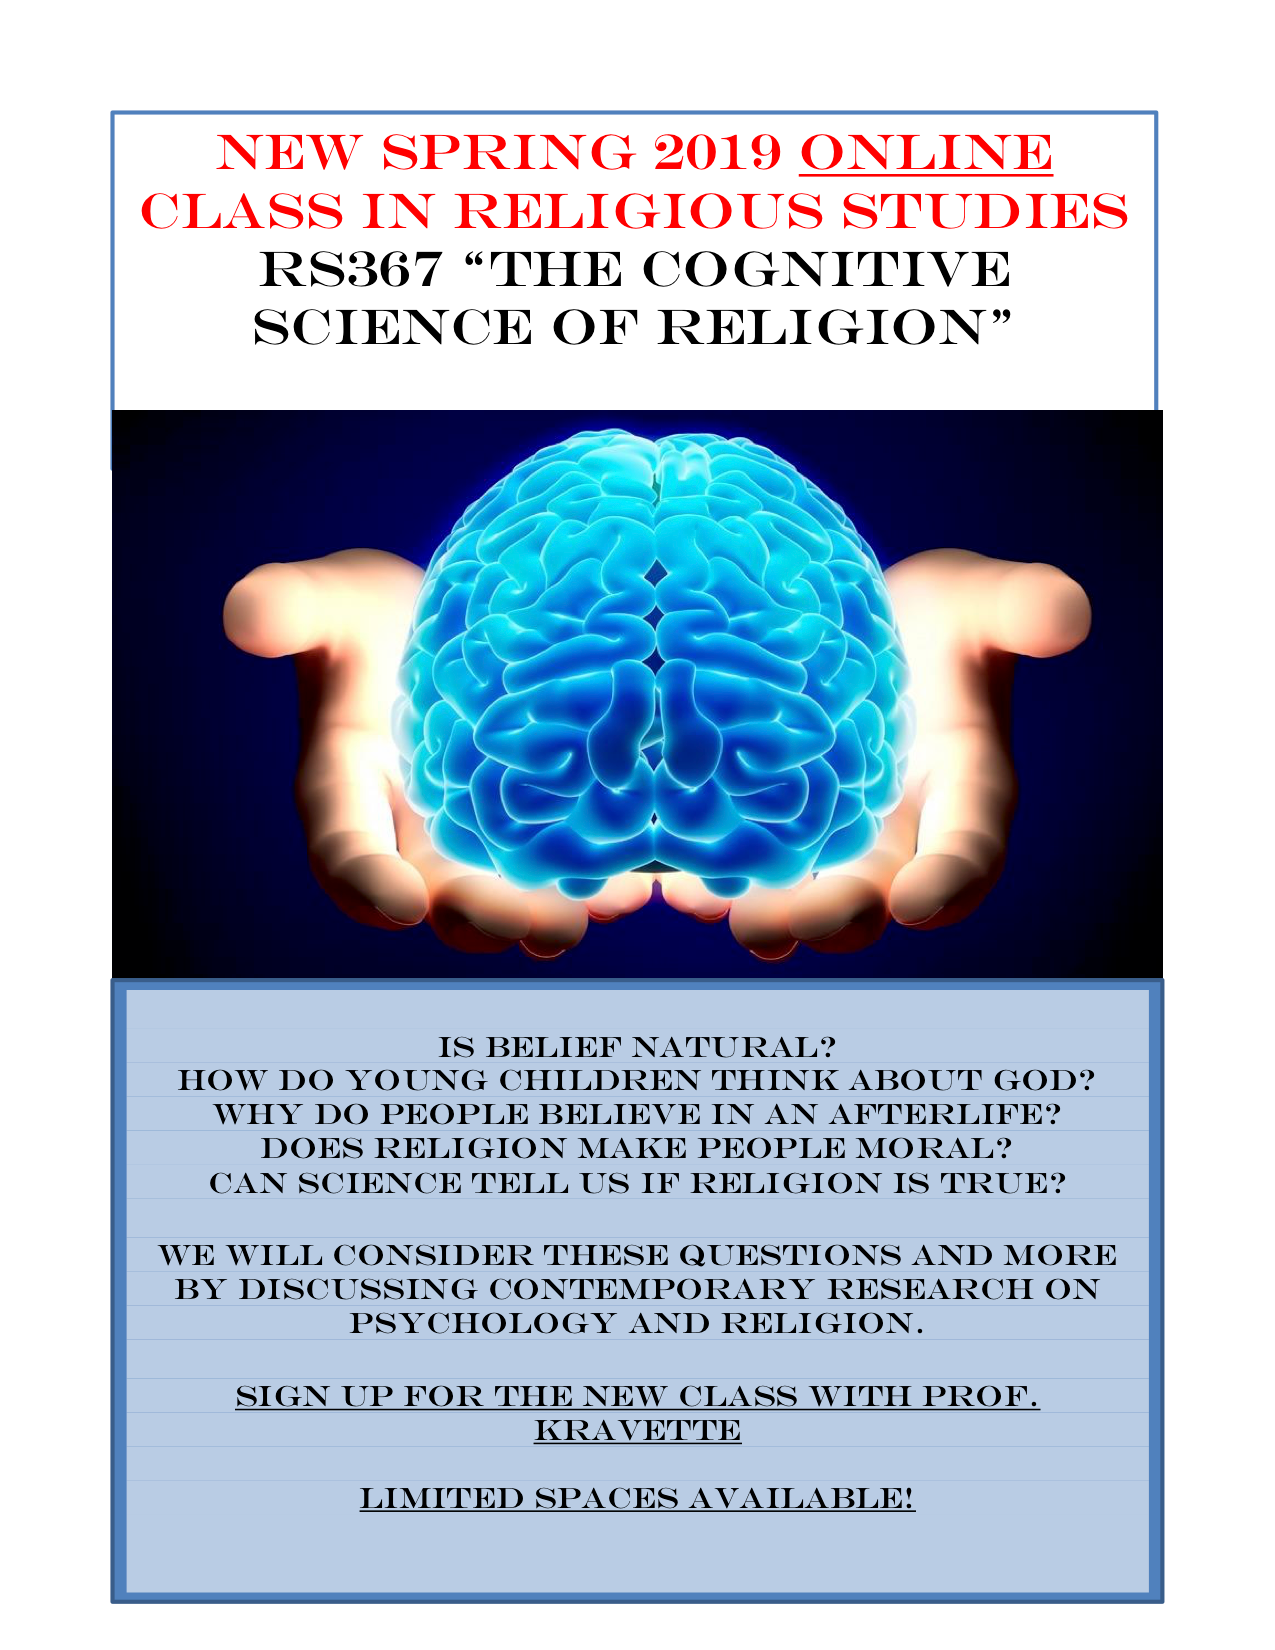 New Class! Cognitive Science of Religion - Spring 2019